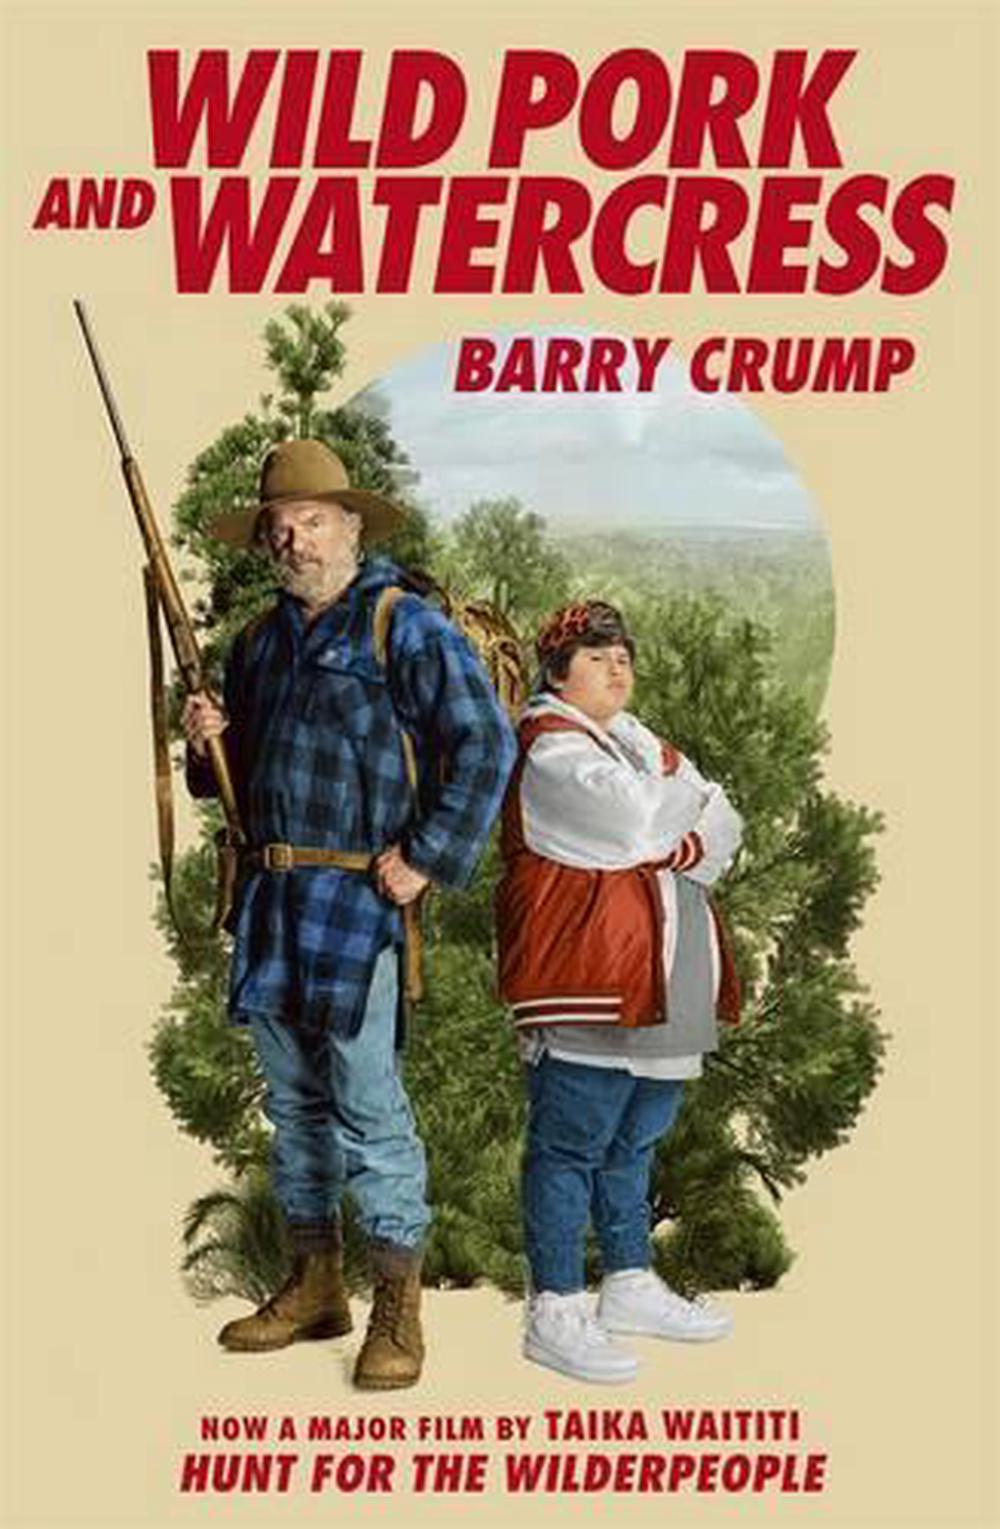 Wild Pork and Watercress by Barry Crump, Paperback, 9780143573746 | Buy  online at The Nile